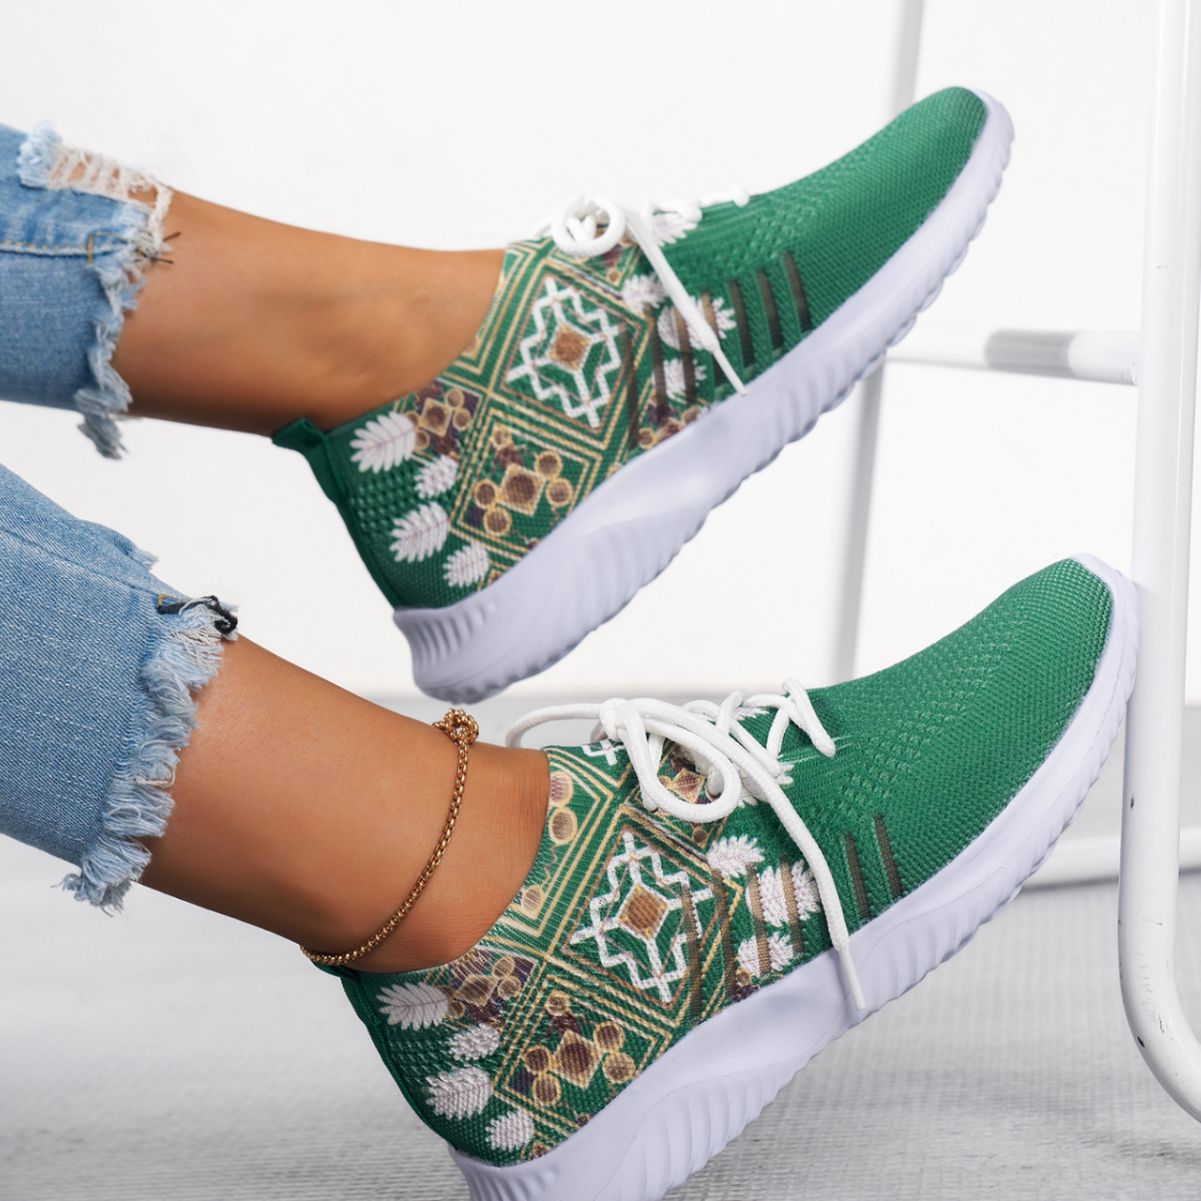 Summer New Flying Woven Stylish Flat Shoes